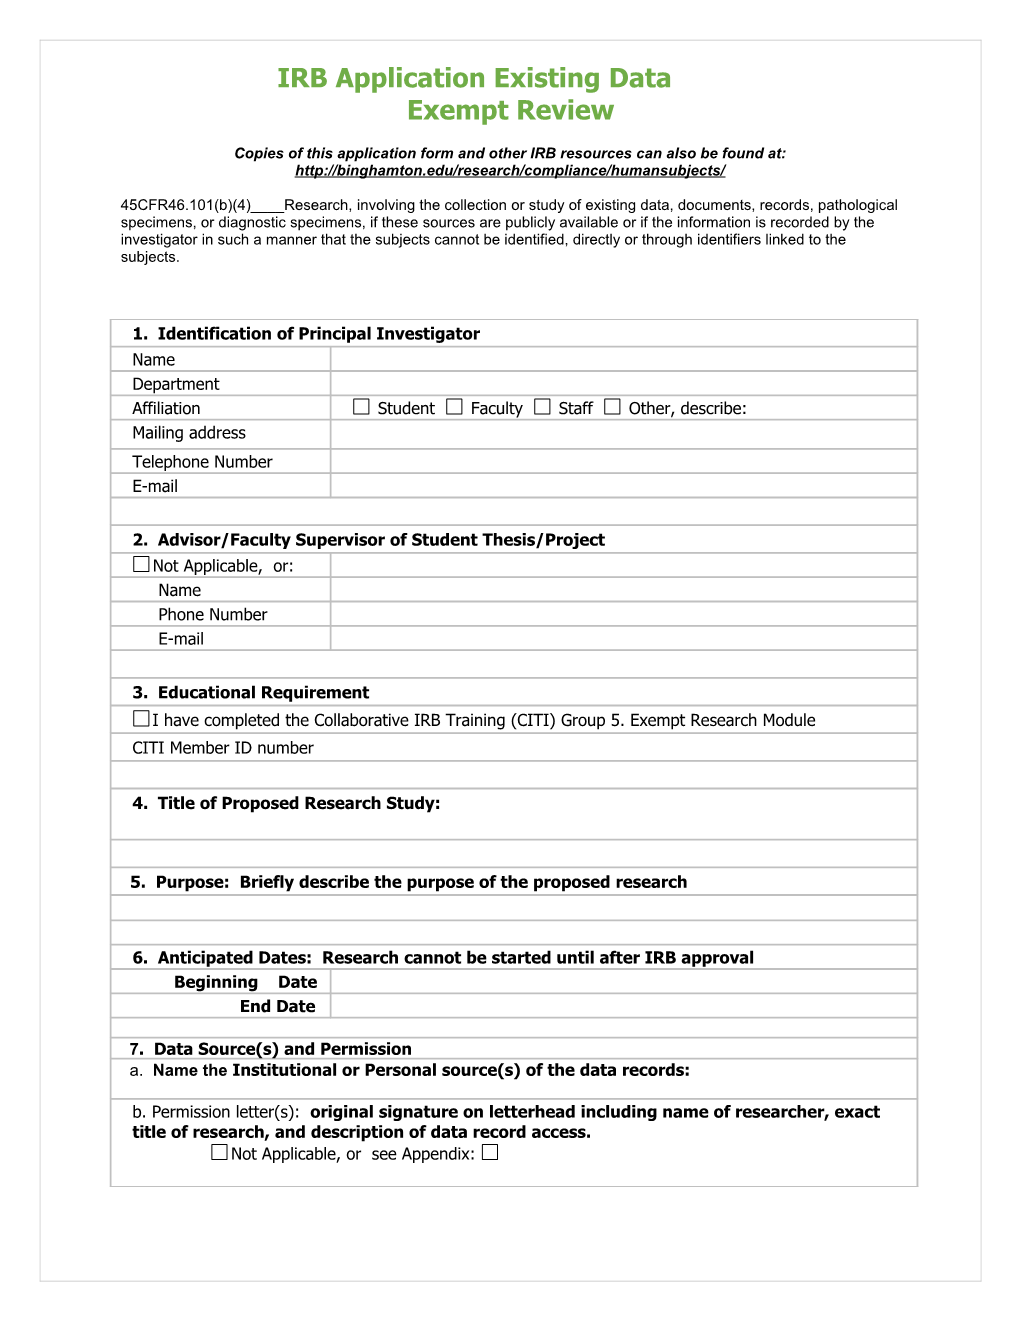 IRB Application for Use of Existing Data Administrative Review